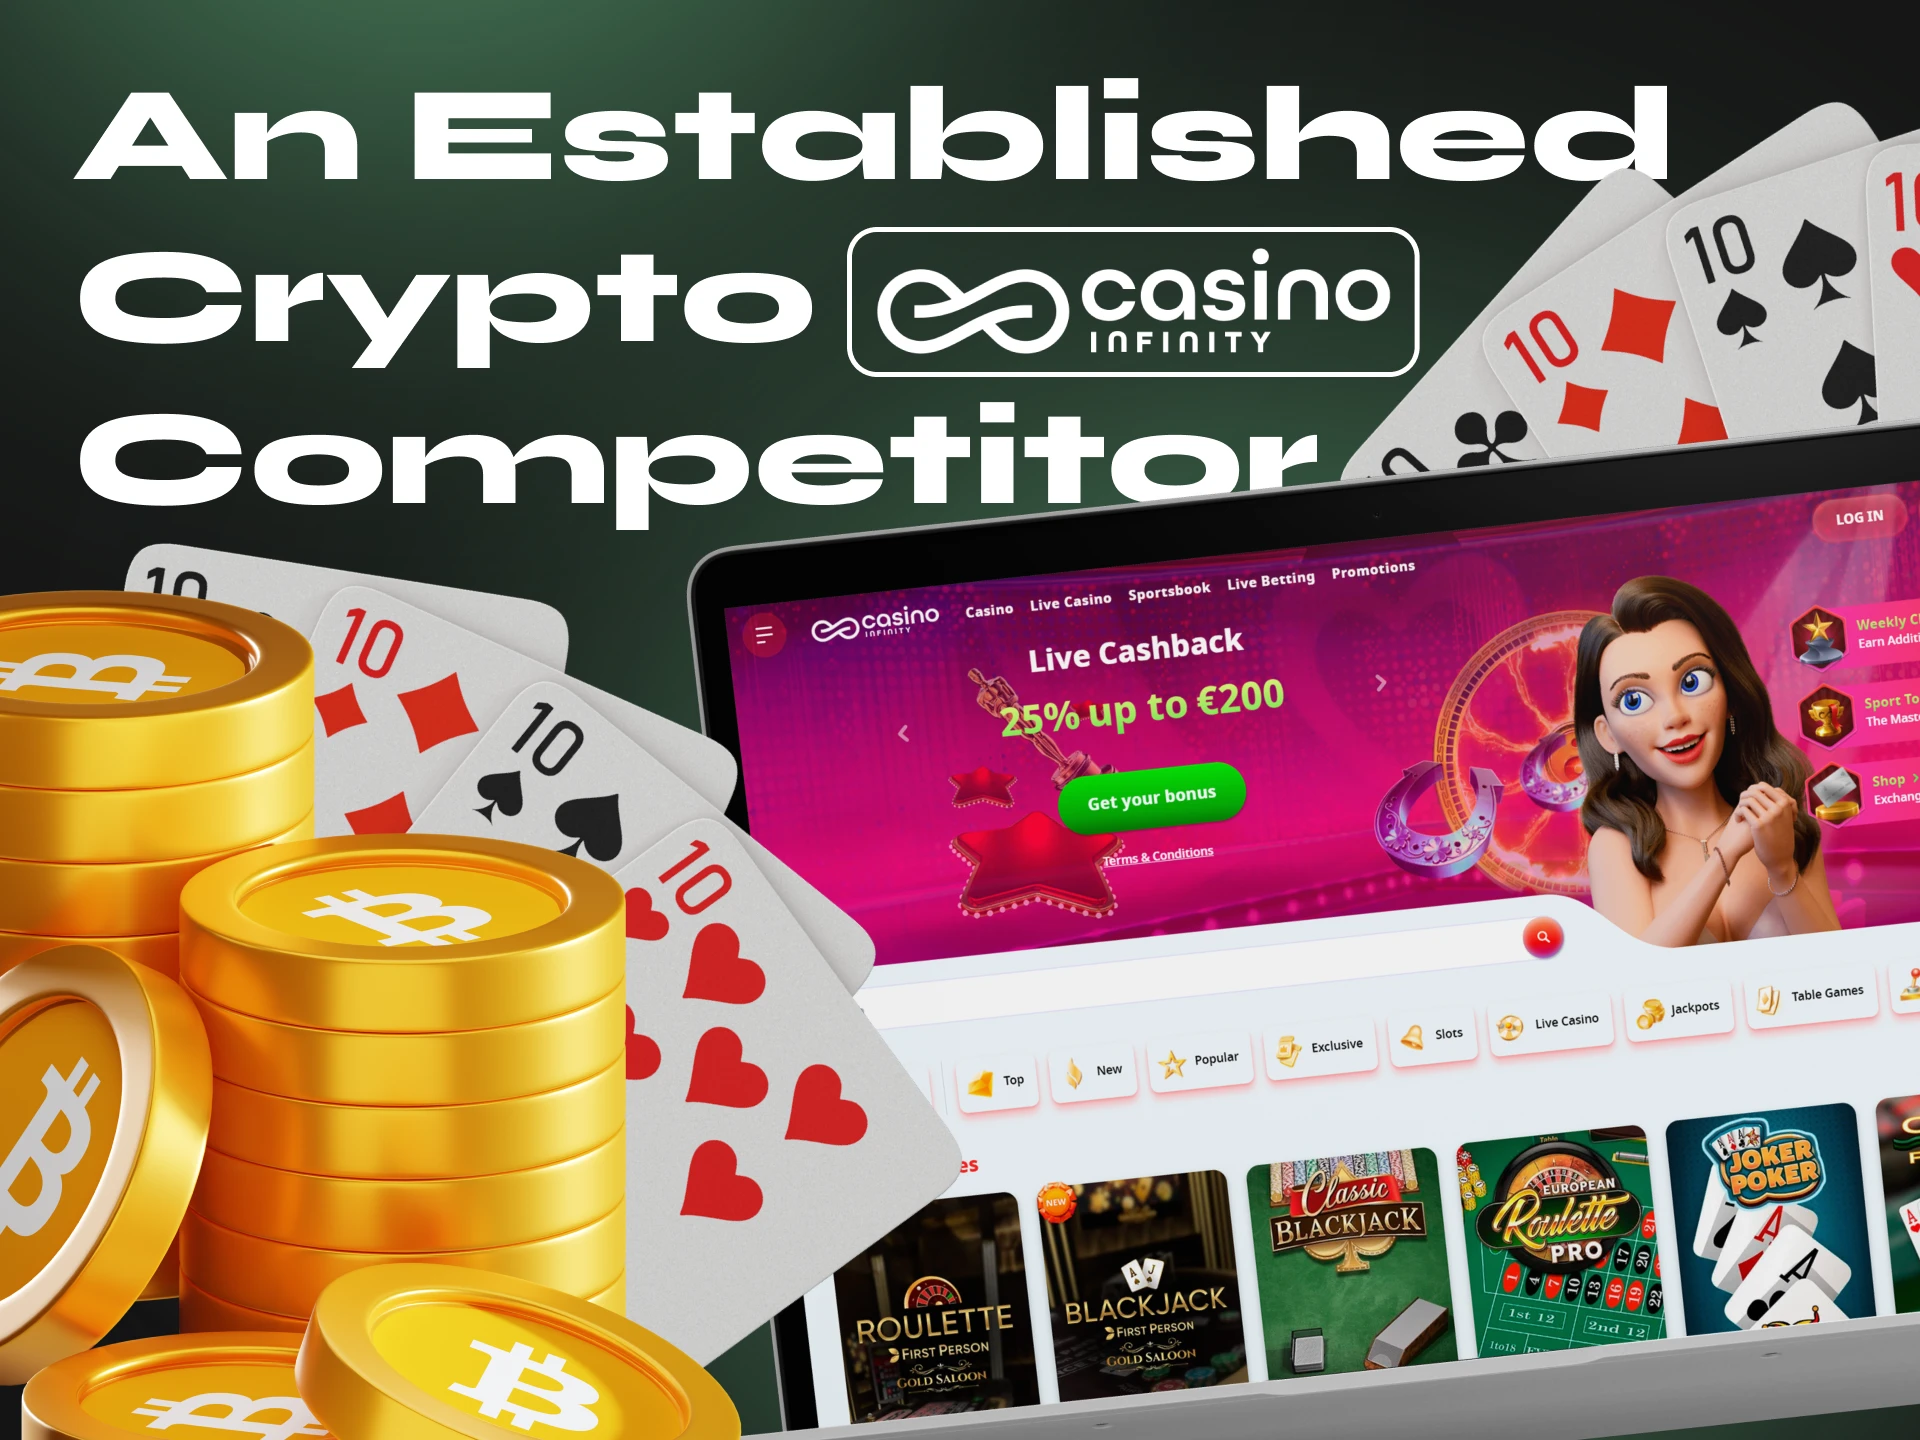 Infinity Casino is a good choice for playing blackjack with cryptocurrency.